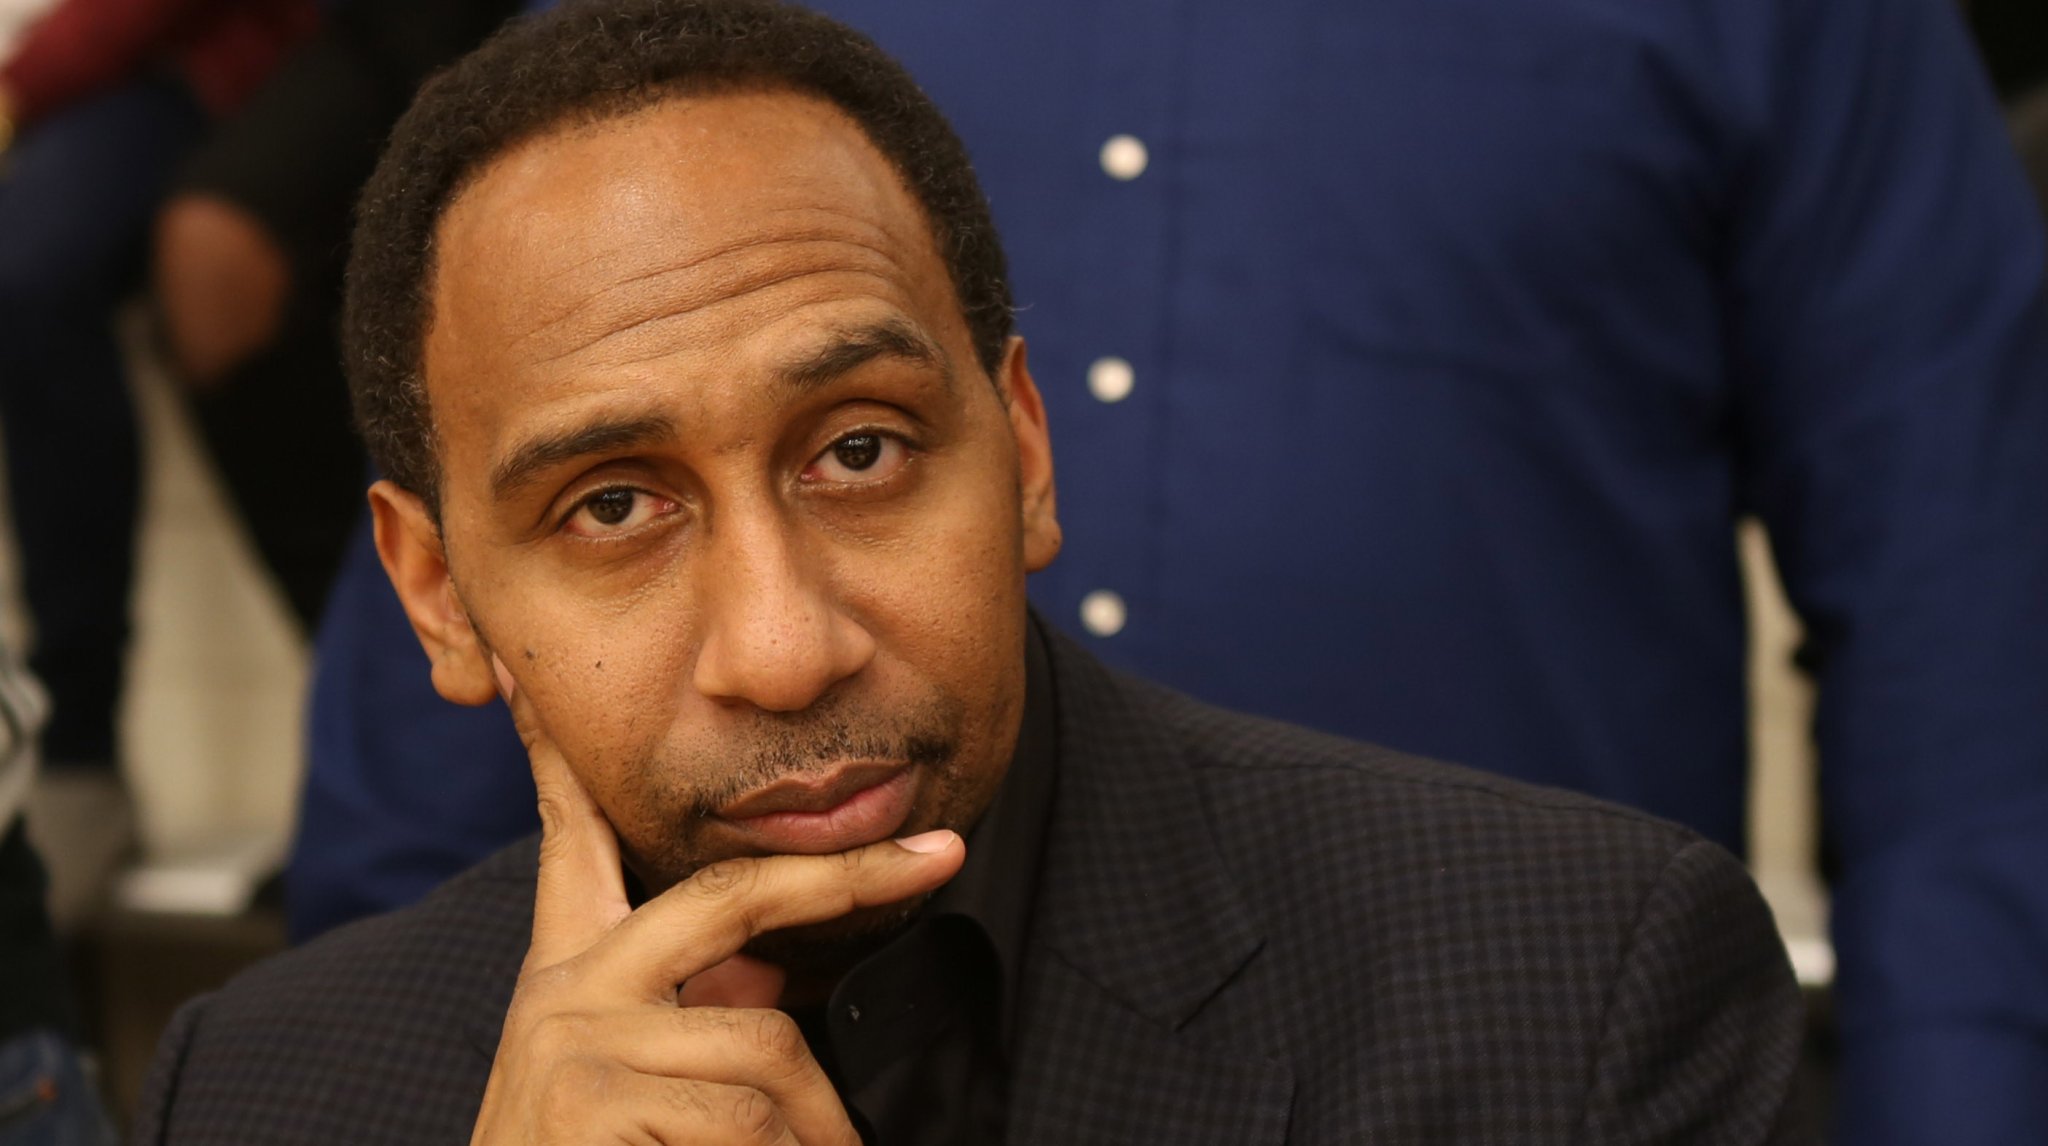 Stephen A. Smith Loses It On Max Kellerman After He Argues Trae Young's Ceiling Is Higher Than Steph Curry's